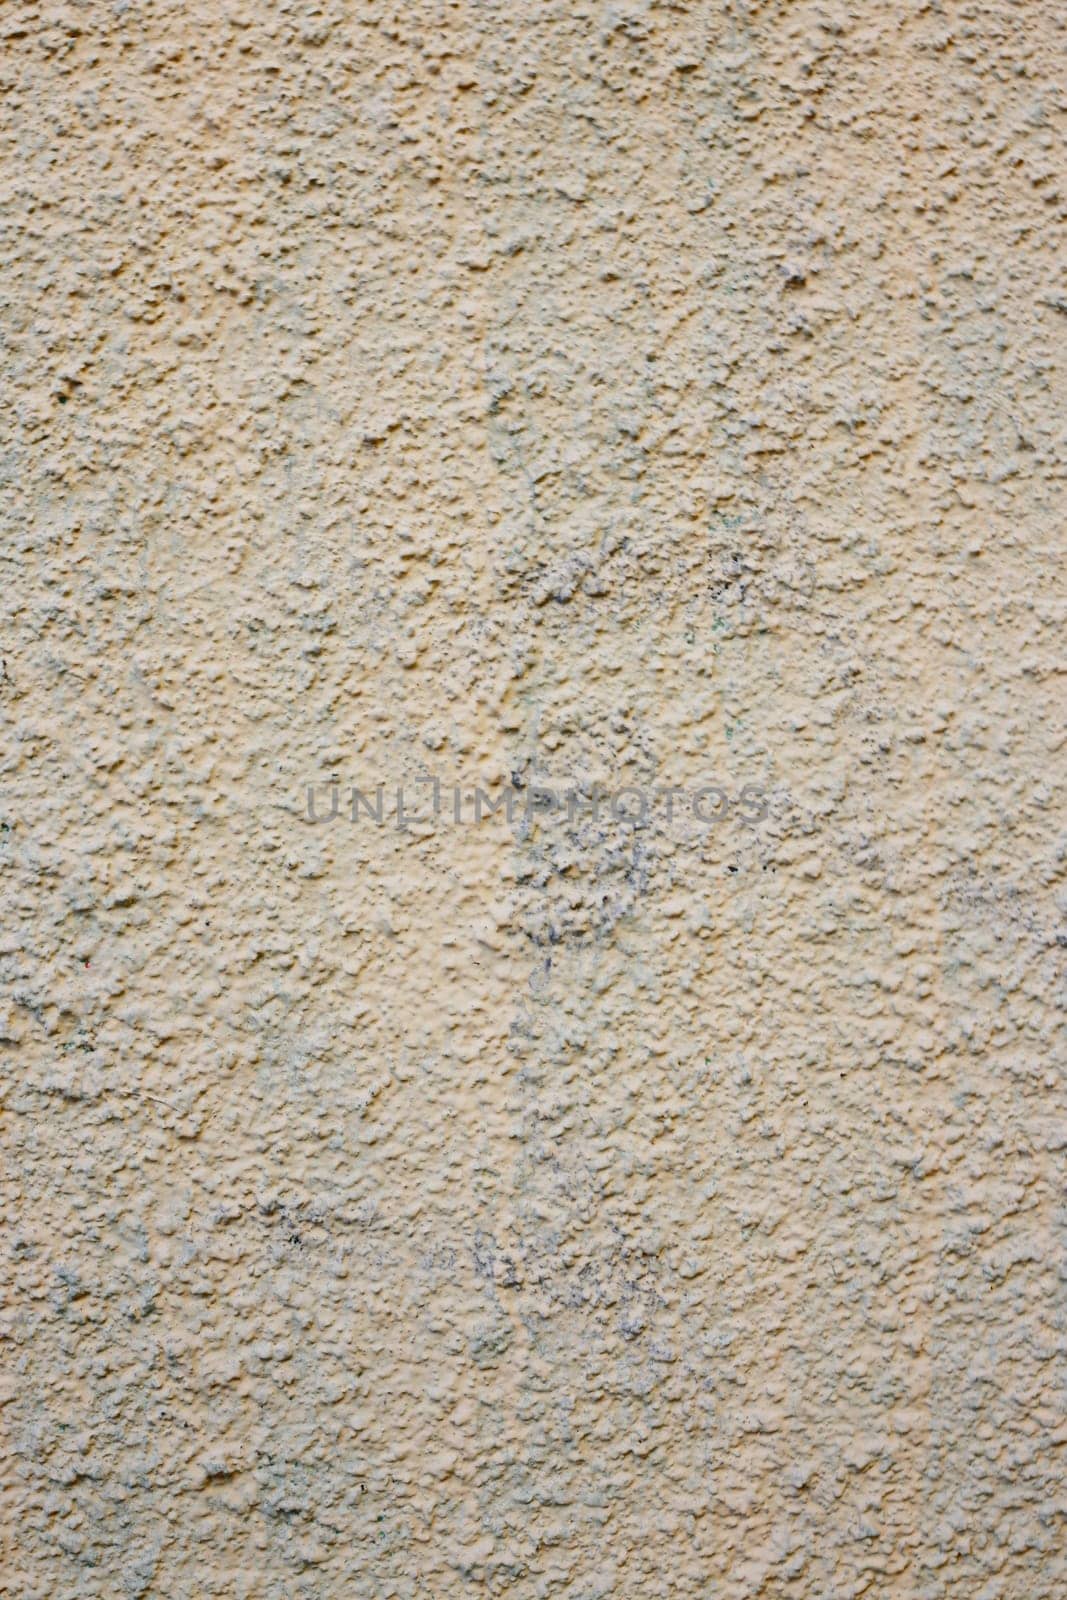 Abandoned beige wall. Concrete wall texture background.